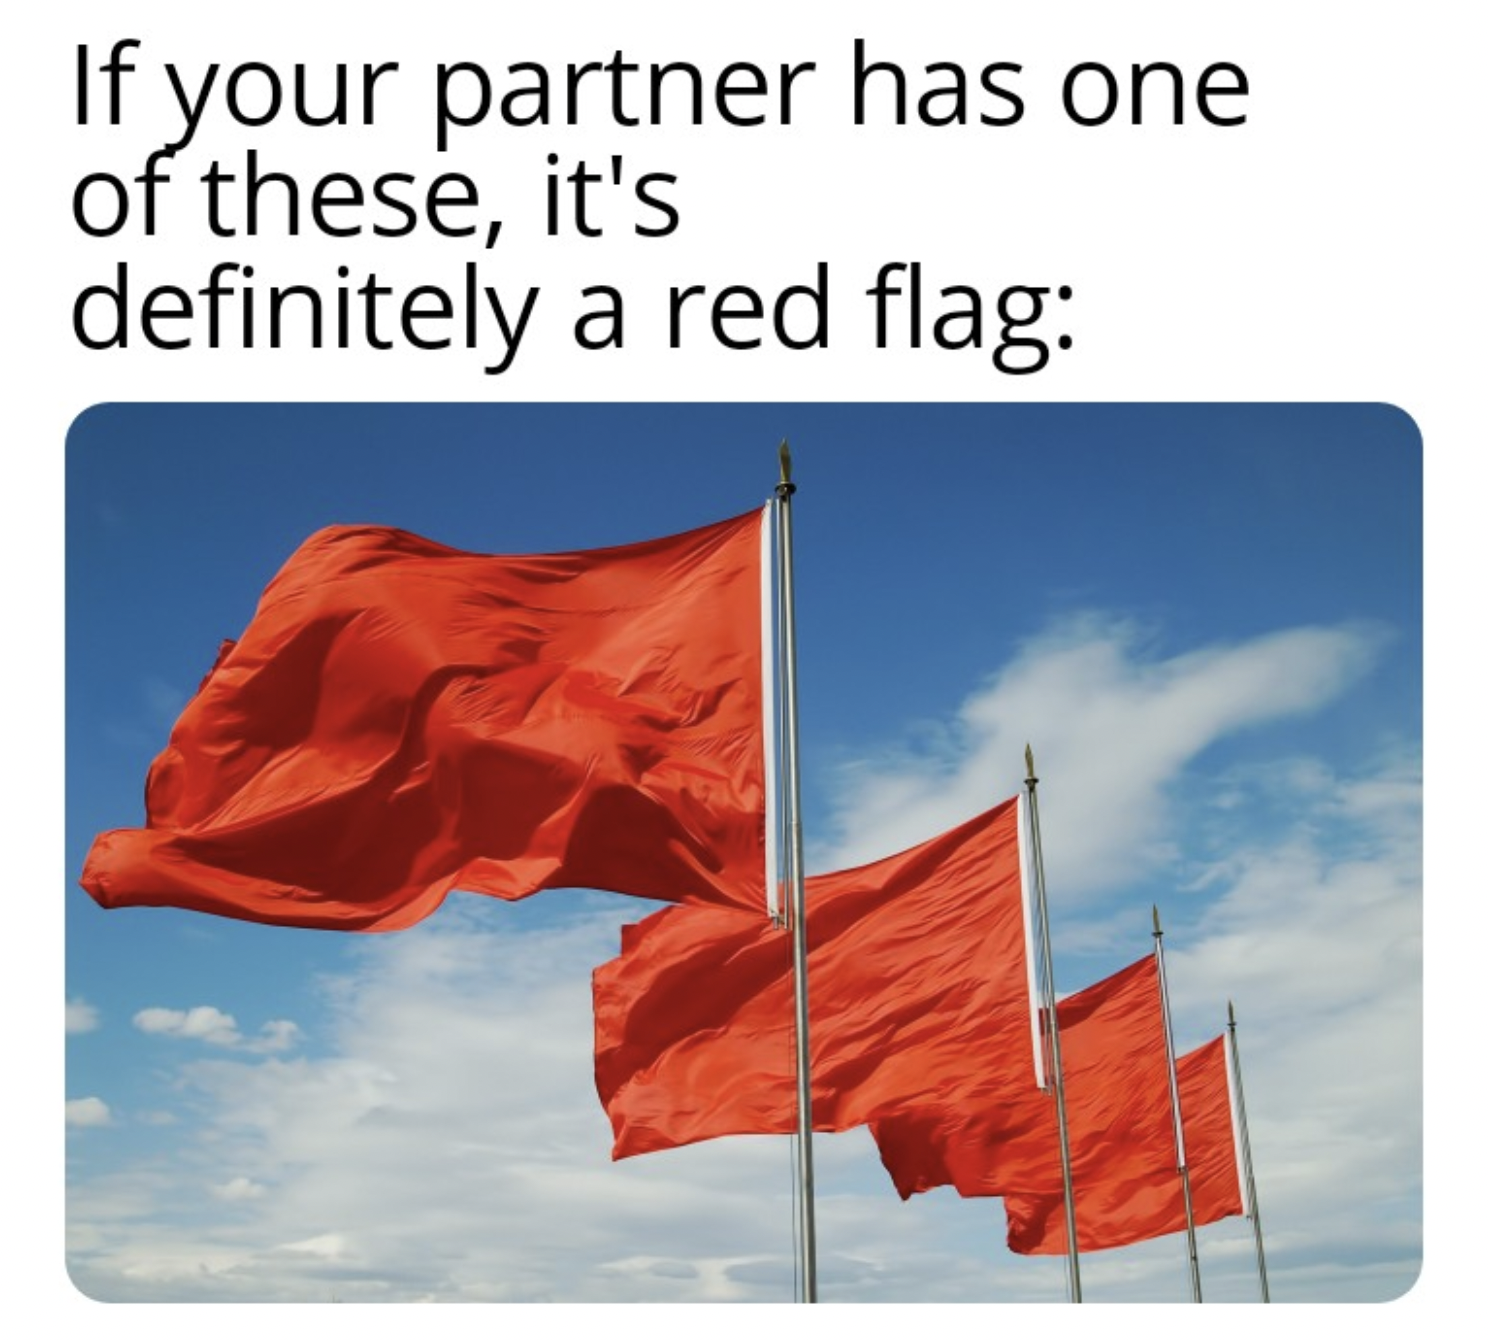 Anti-Memes - Tell the Truth - red flag - If your partner has one of these, it's definitely a red flag